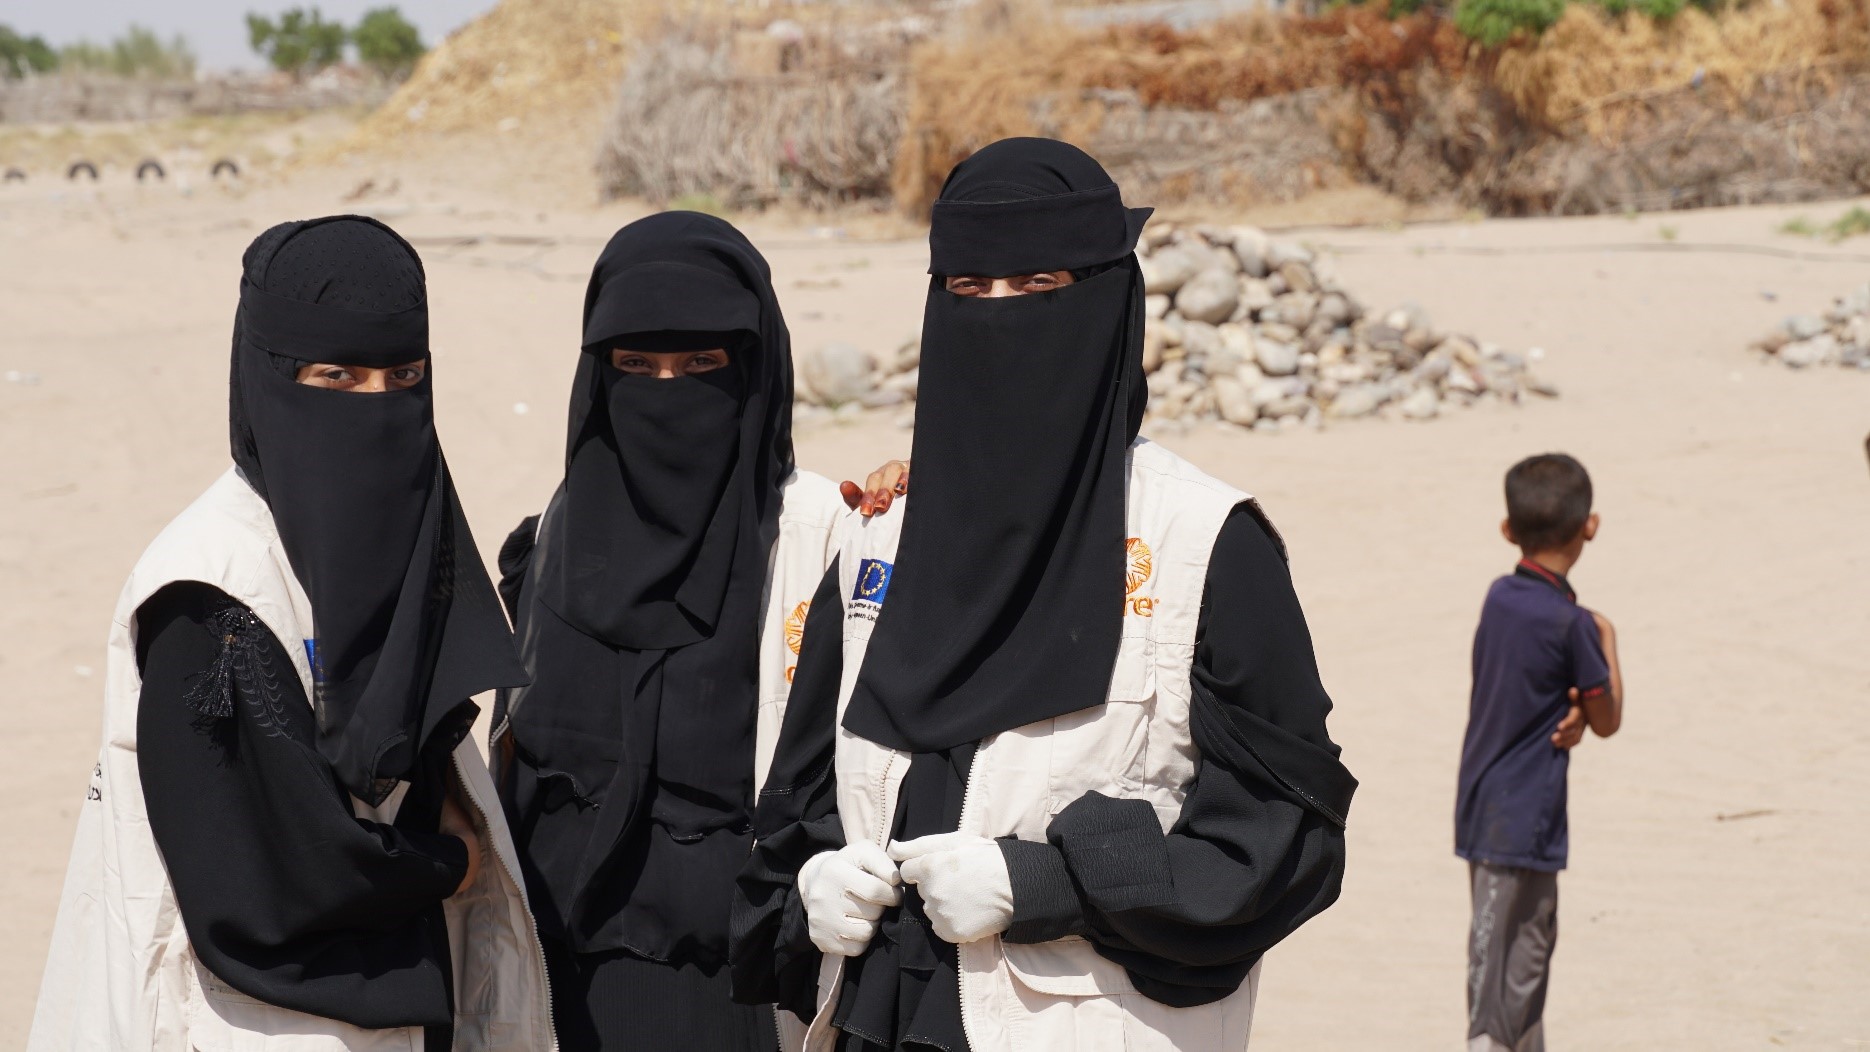 Three women in black burqas standing looking at the camera